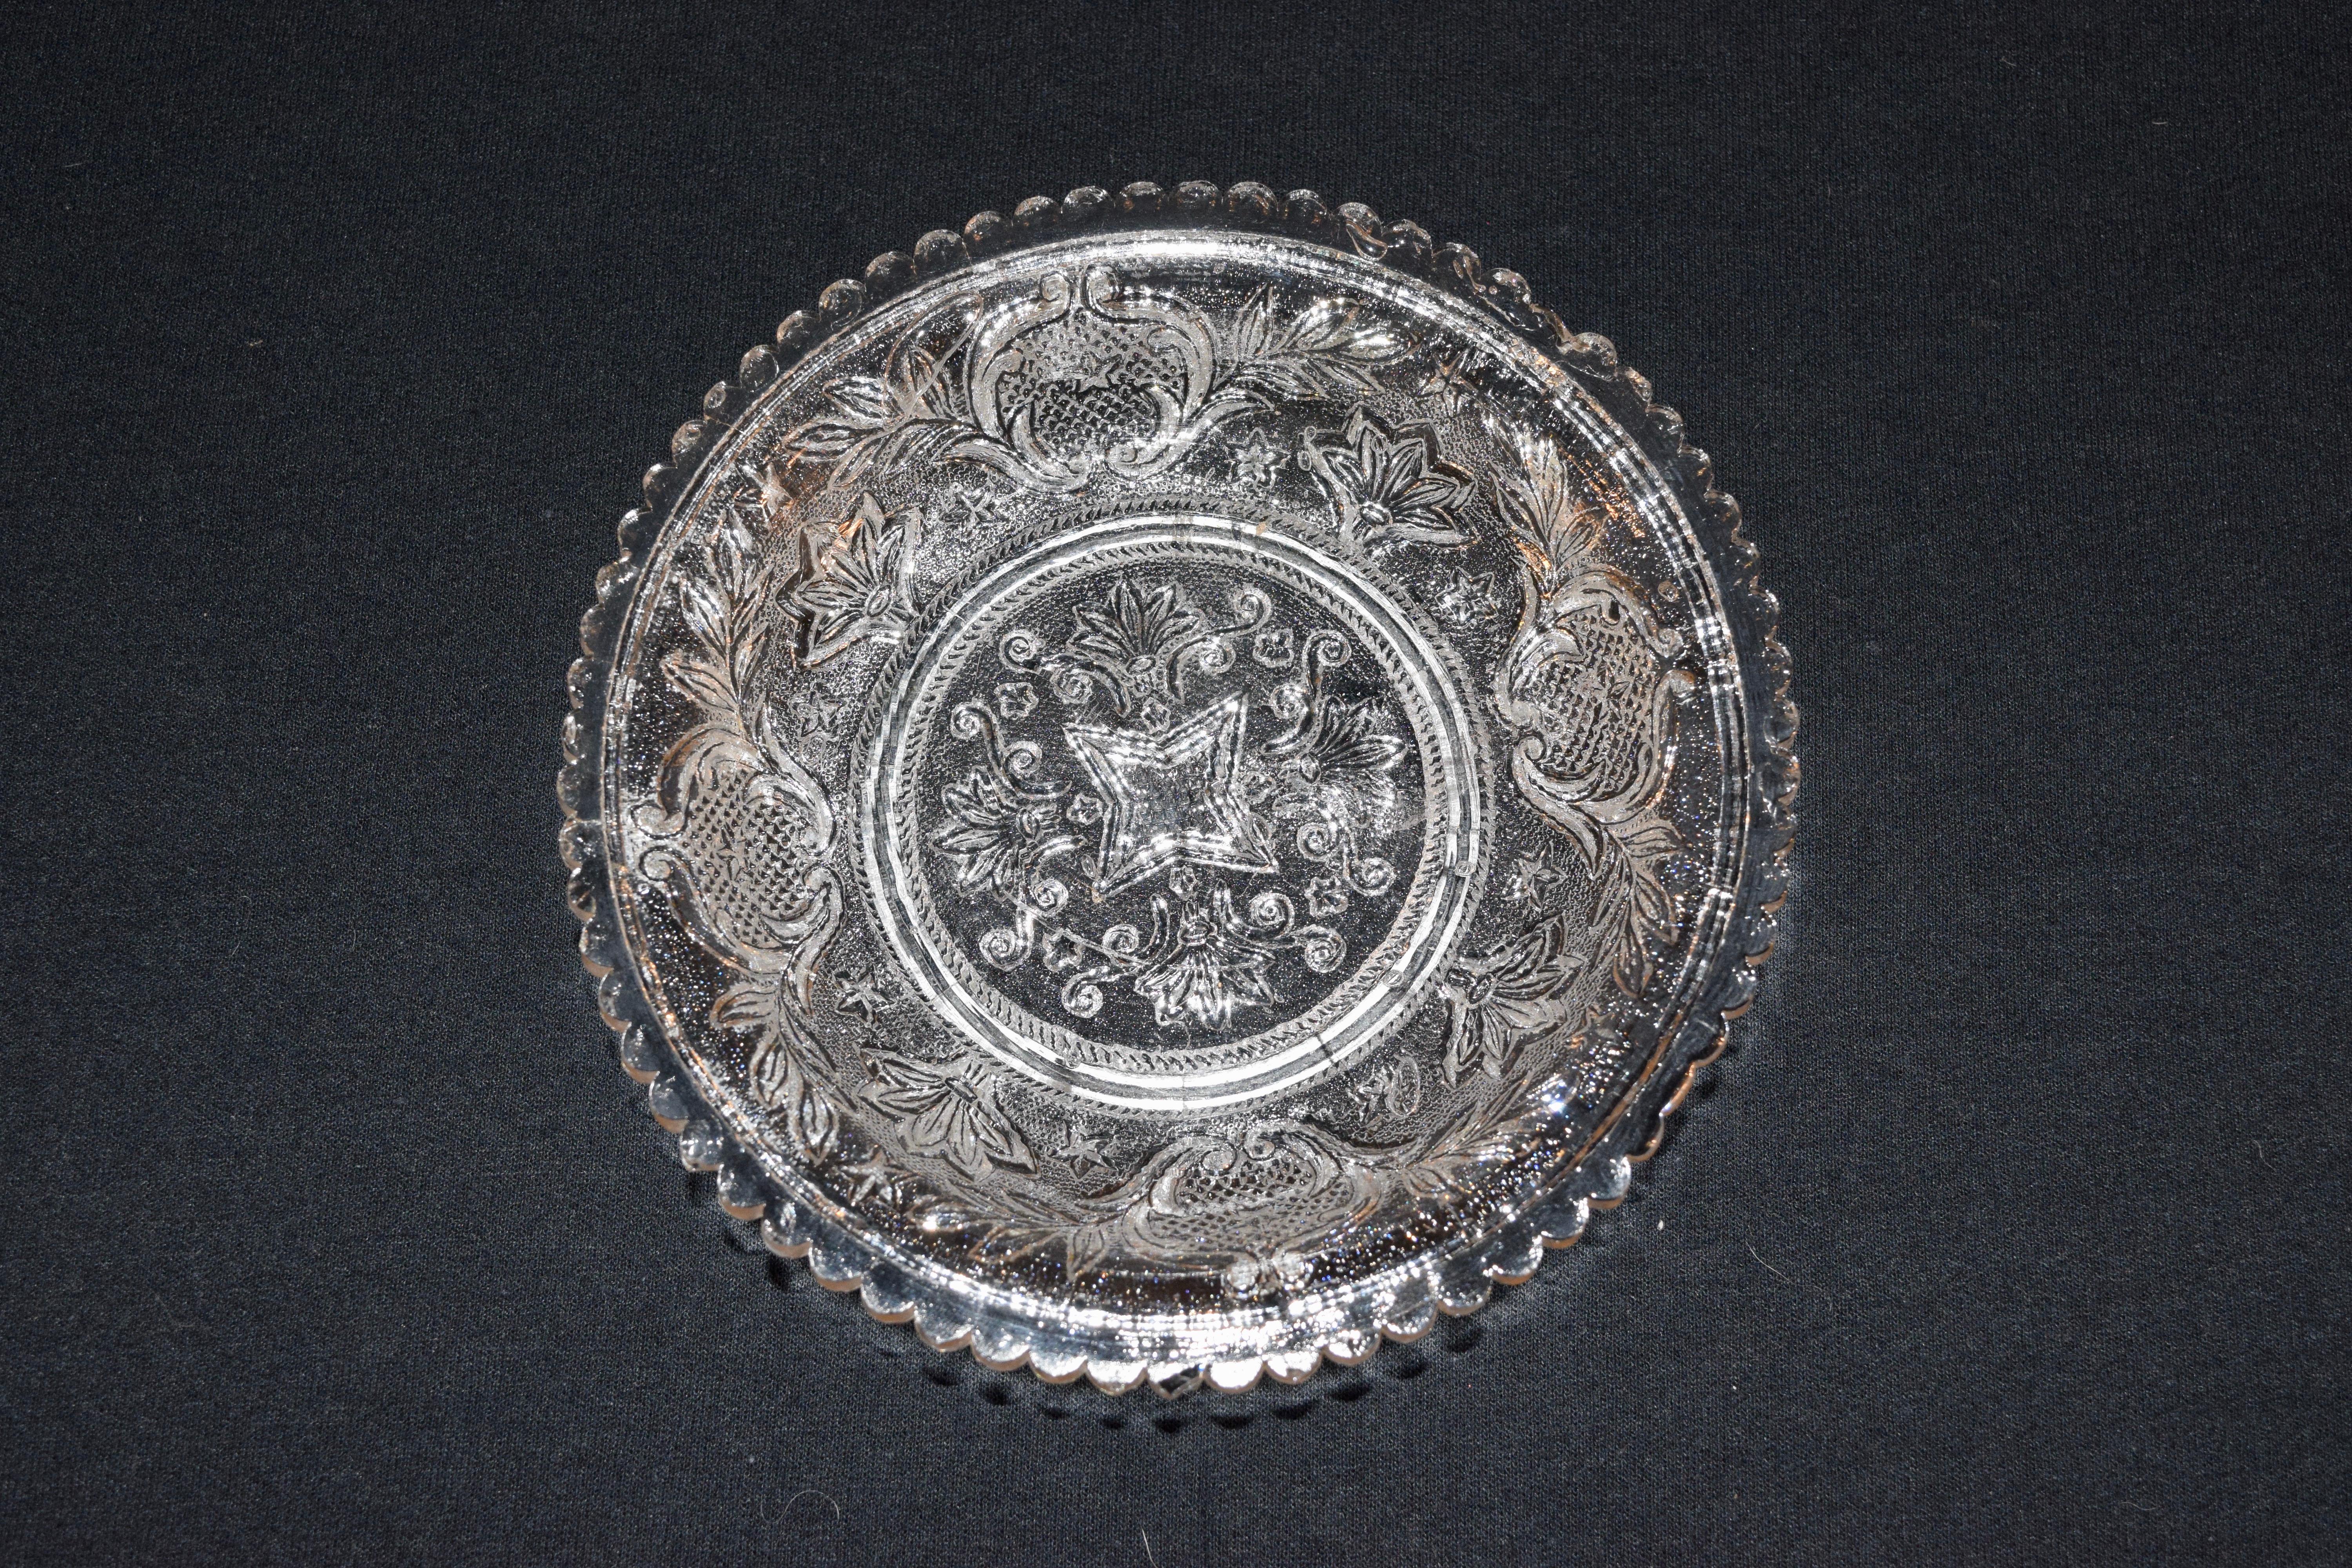 19th century Boston & Sandwich early American pressed glass plate in the 